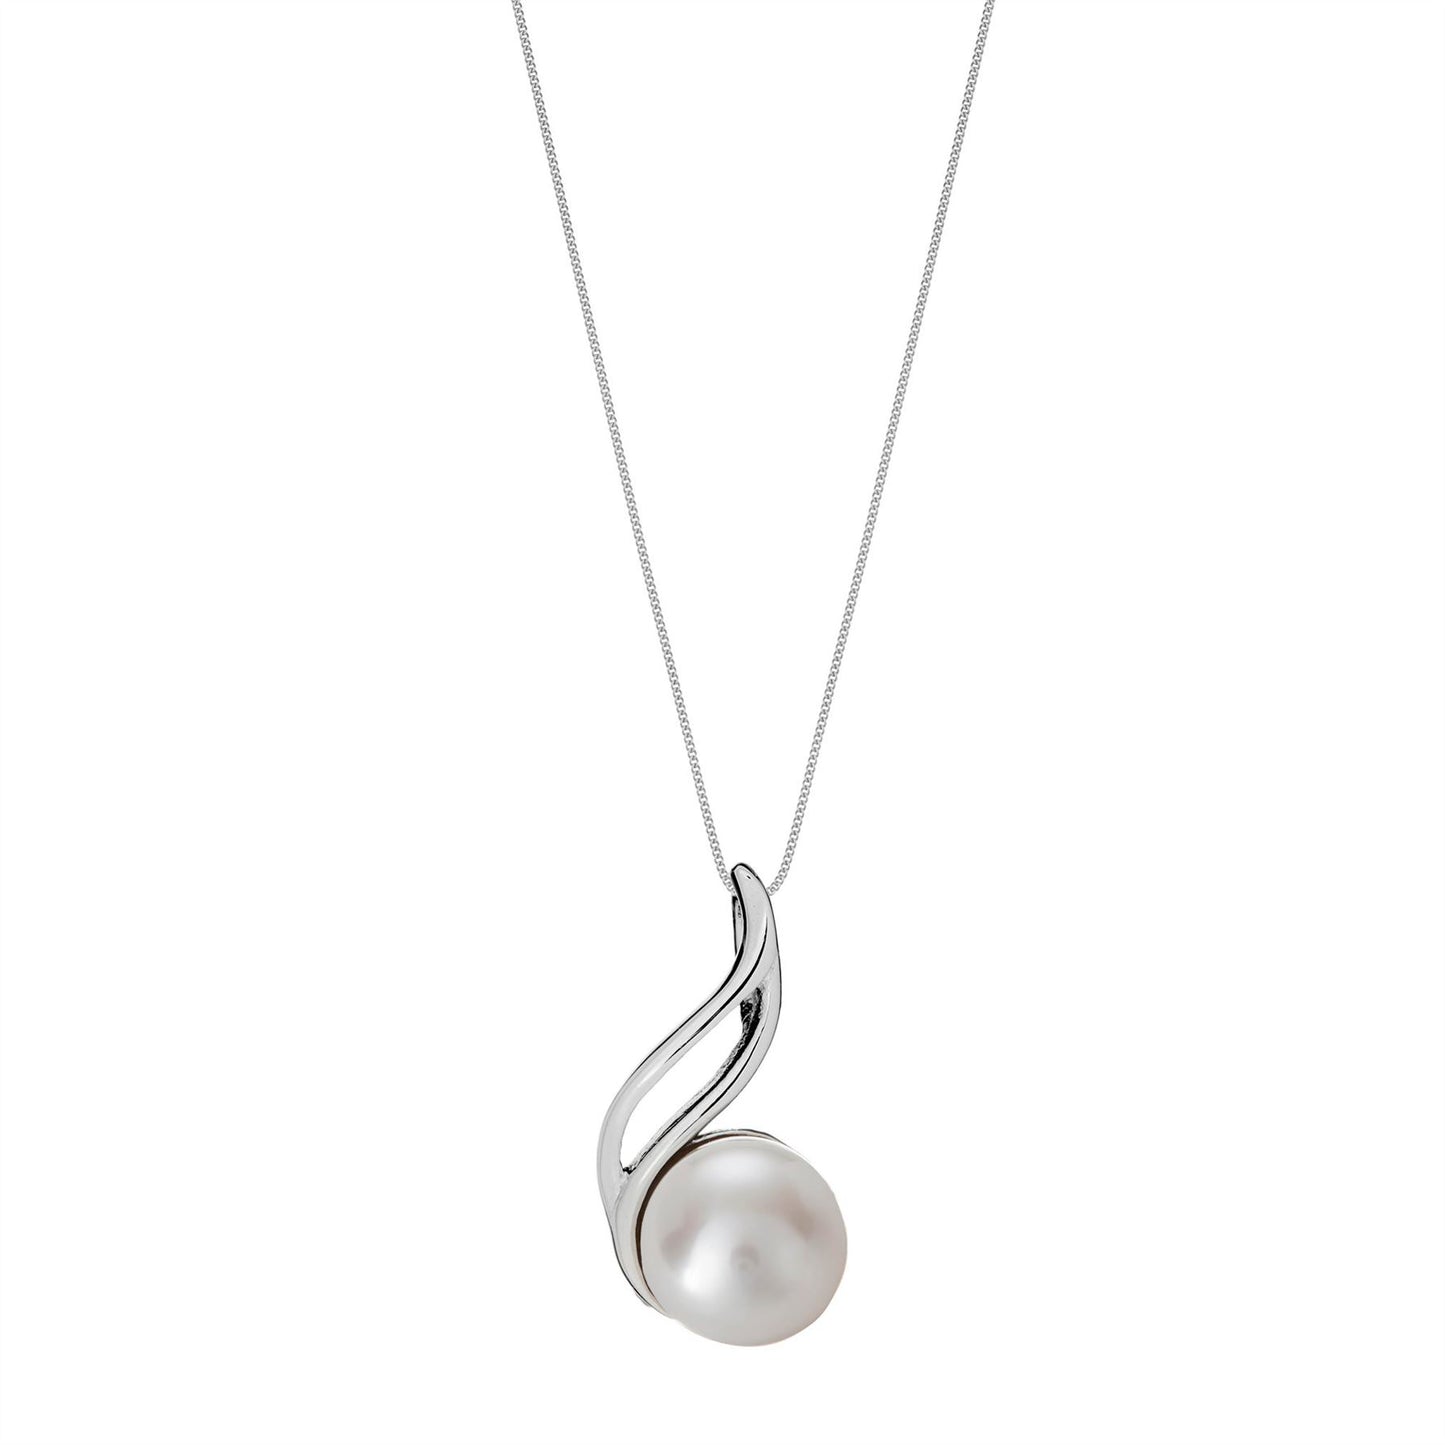 Sterling Silver Teardrop Cream Freshwater Pearl Pendant Chain Necklace